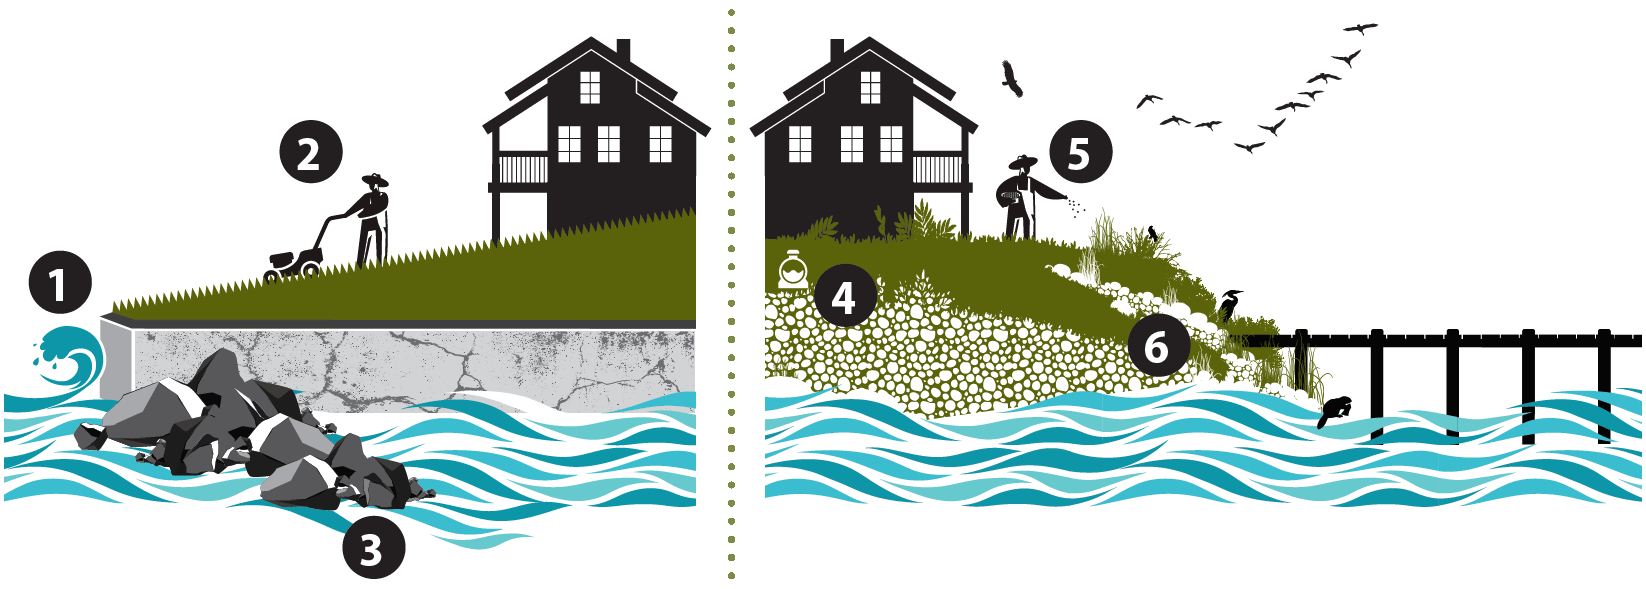 protect-water-and-natural-areas-with-simple-steps-graphic